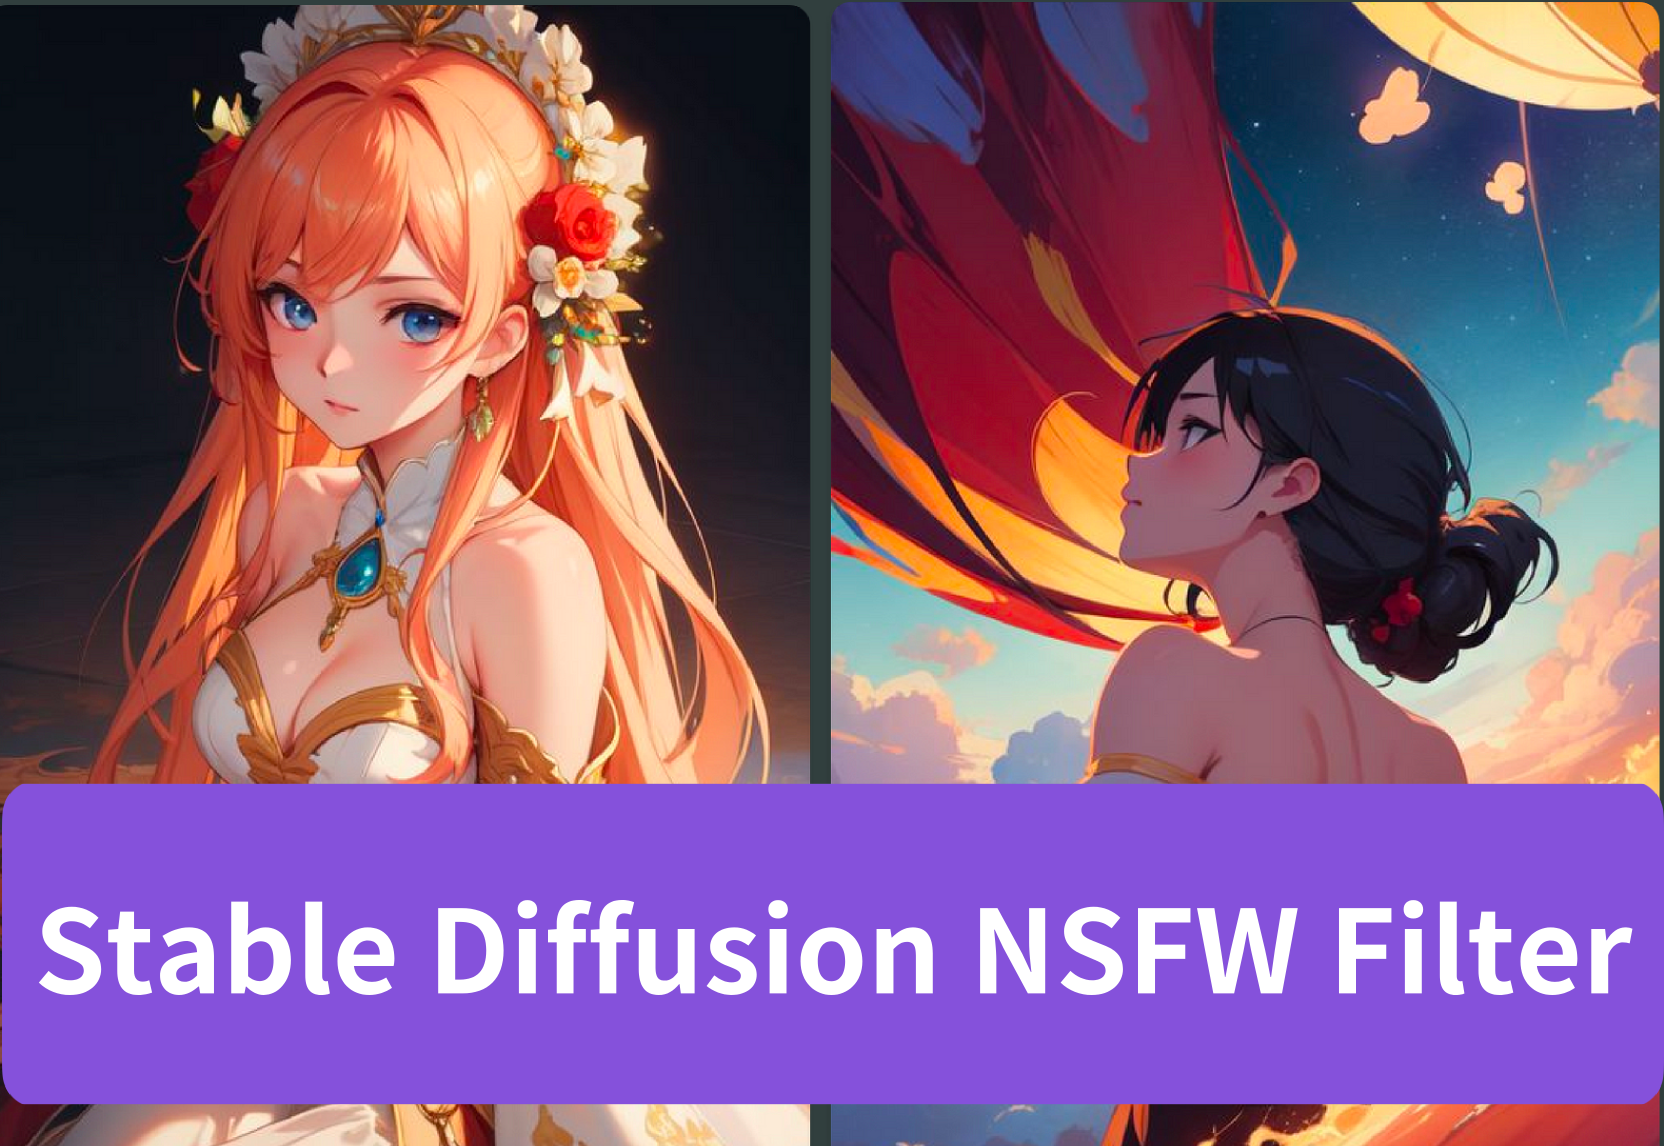 How to Turn off Stable Diffusion NSFW Filter?